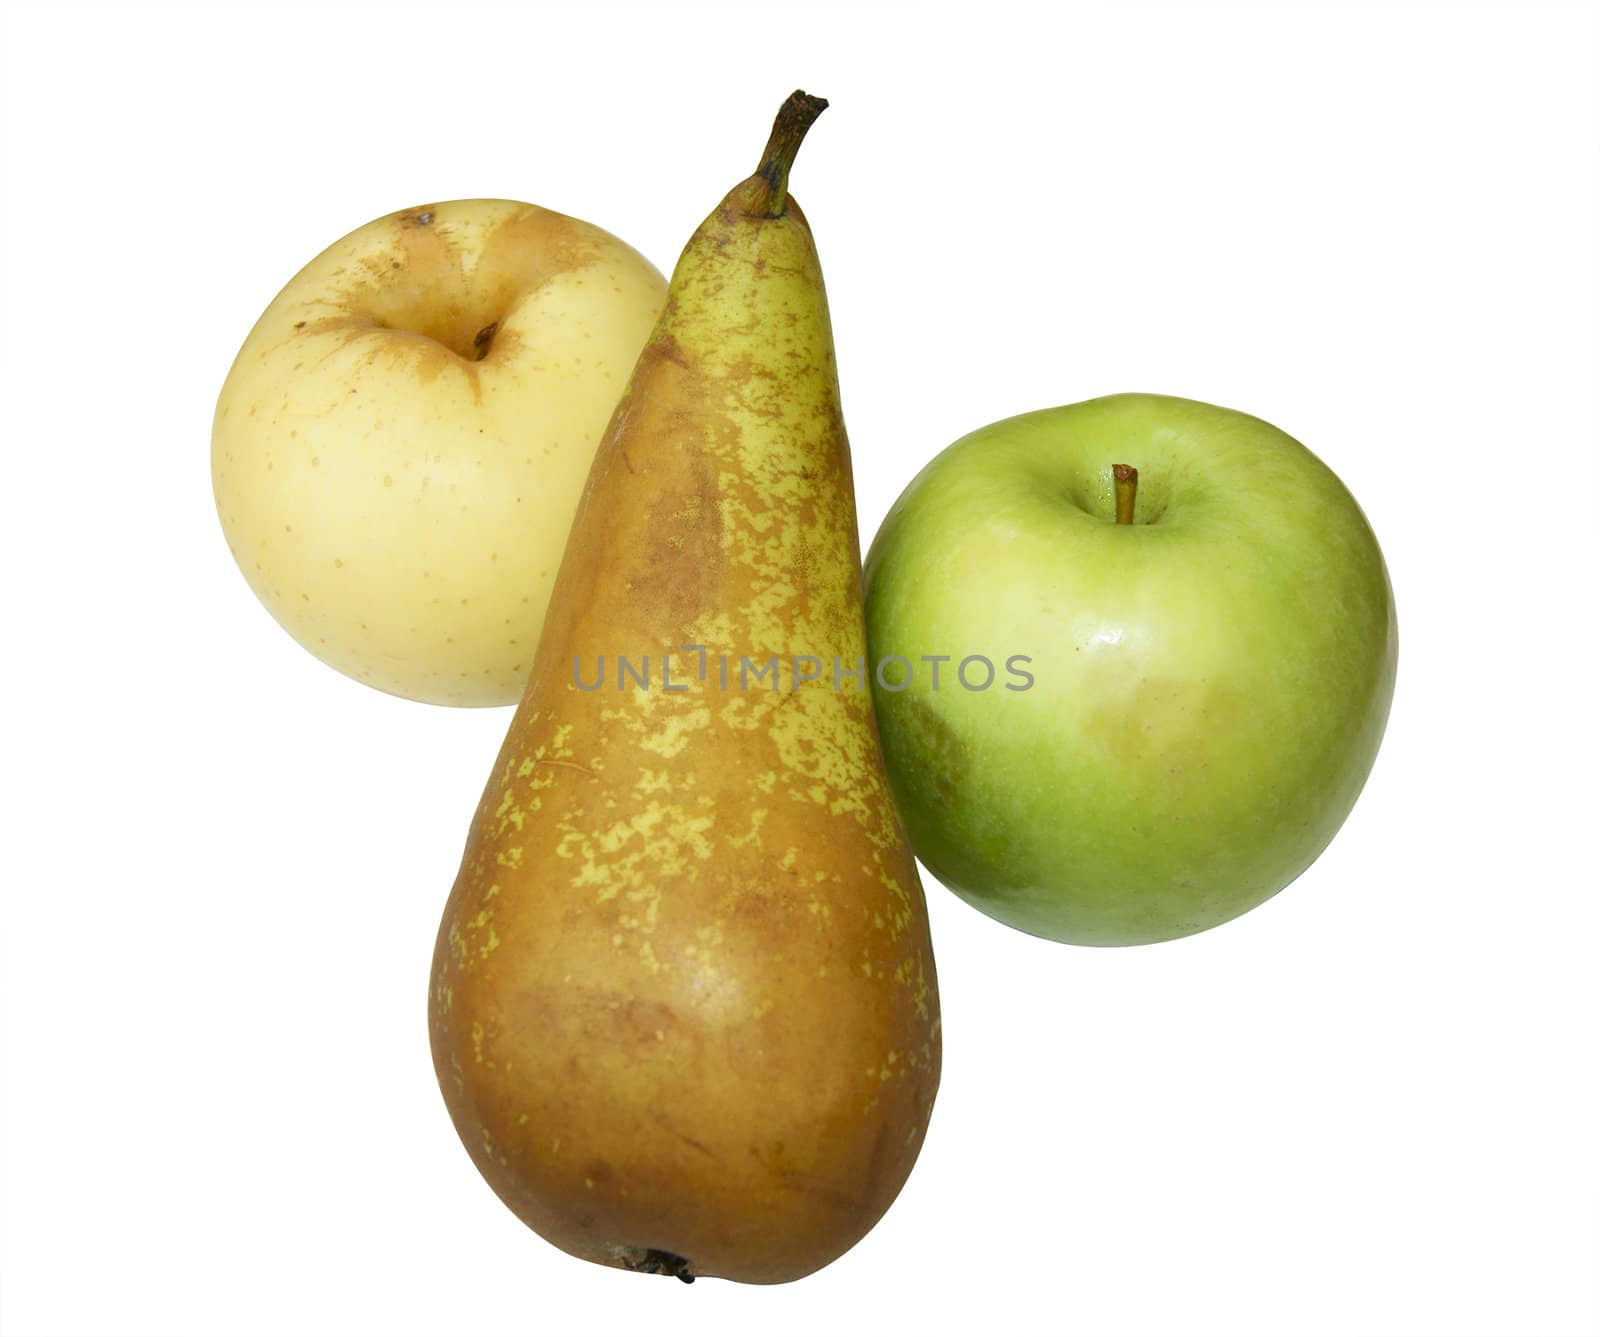 Apple and pear on white background by cobol1964